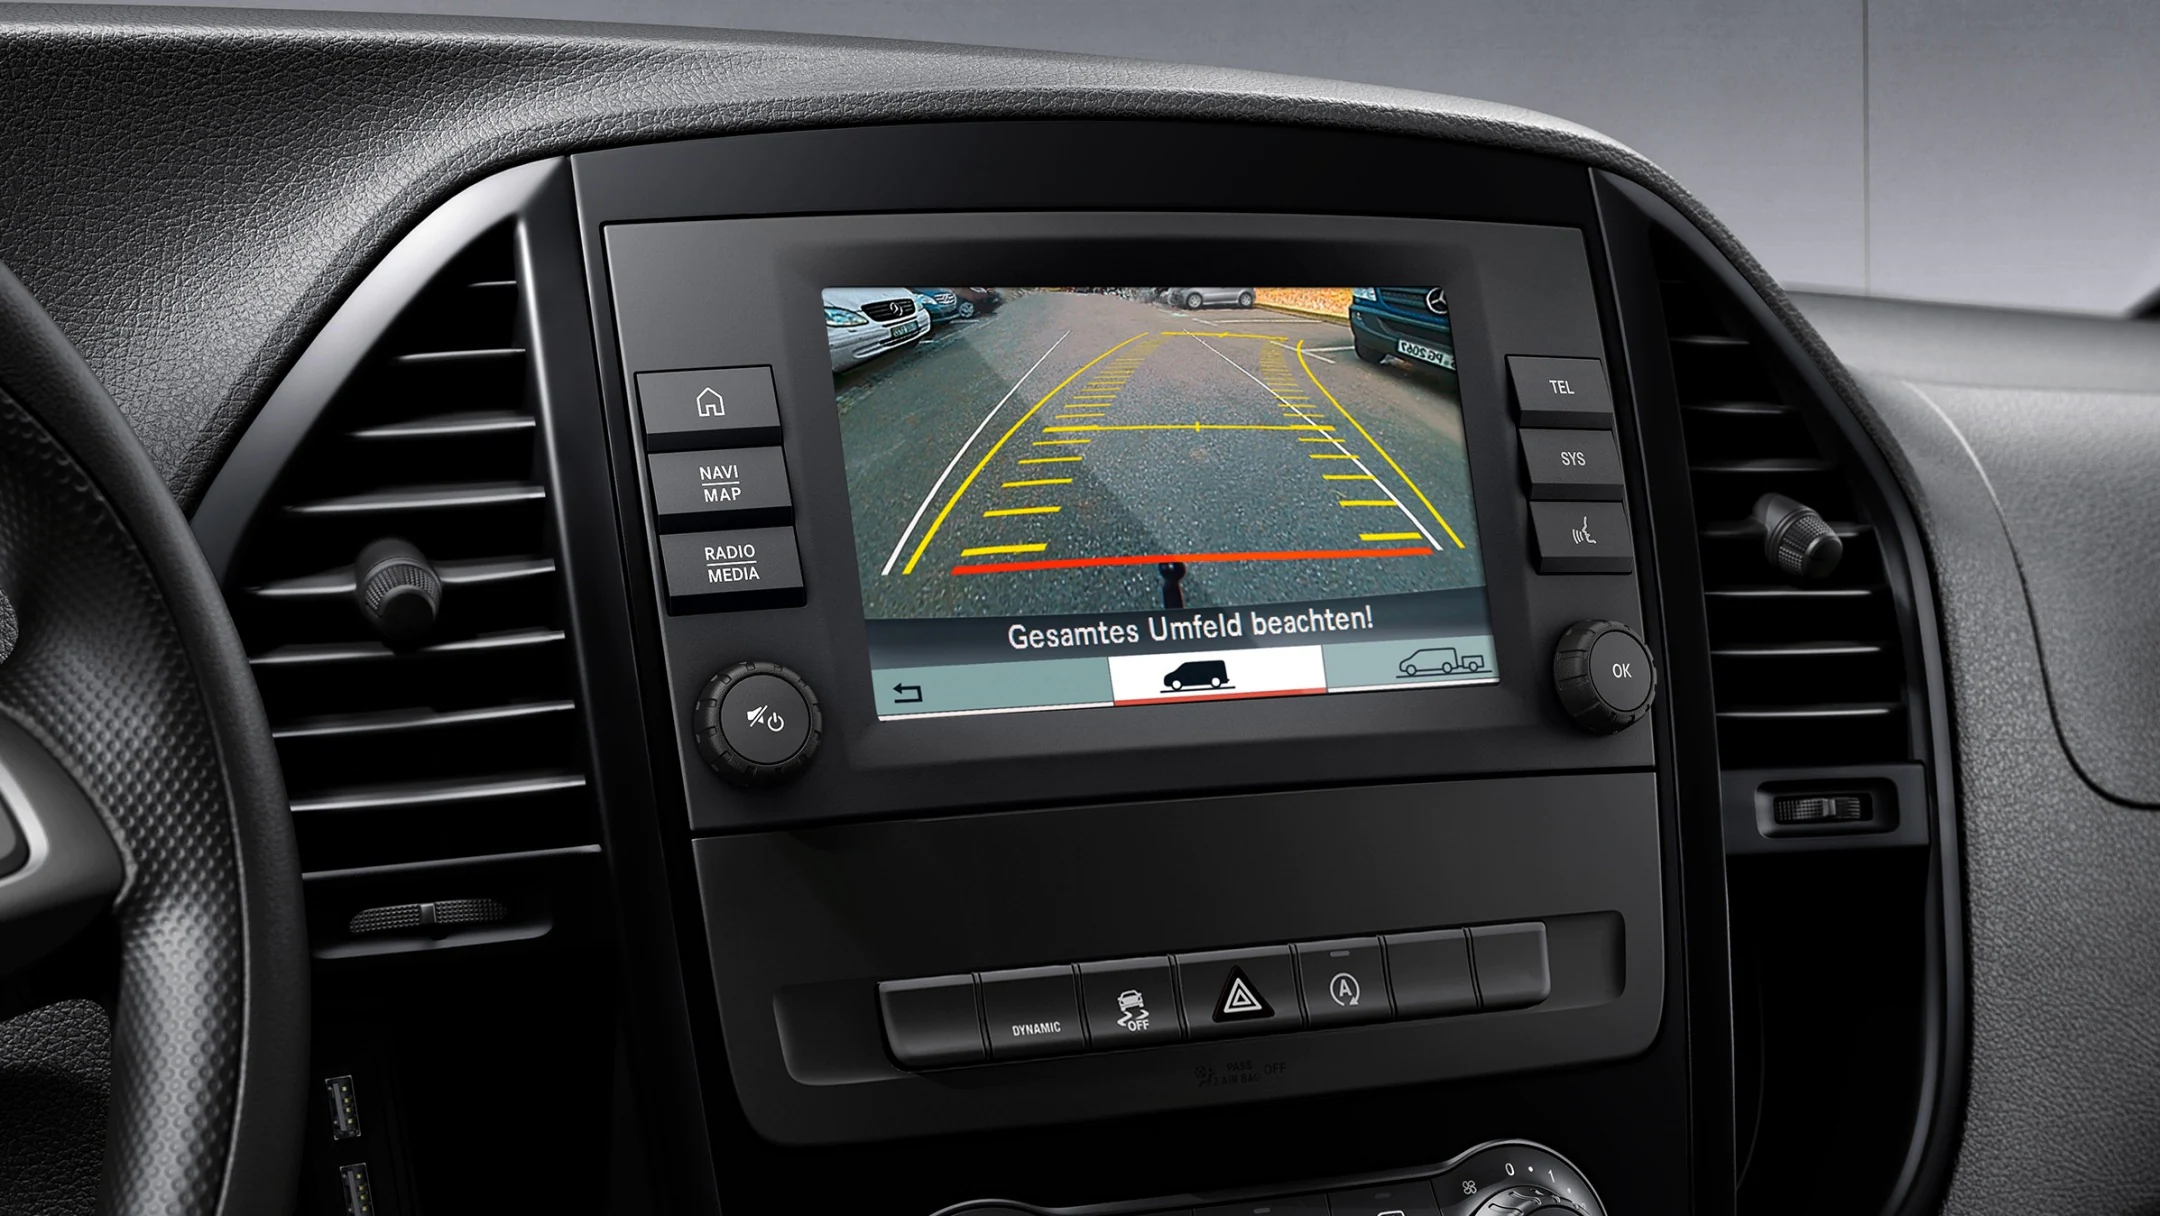 Know what’s happening behind your Vito Tourer